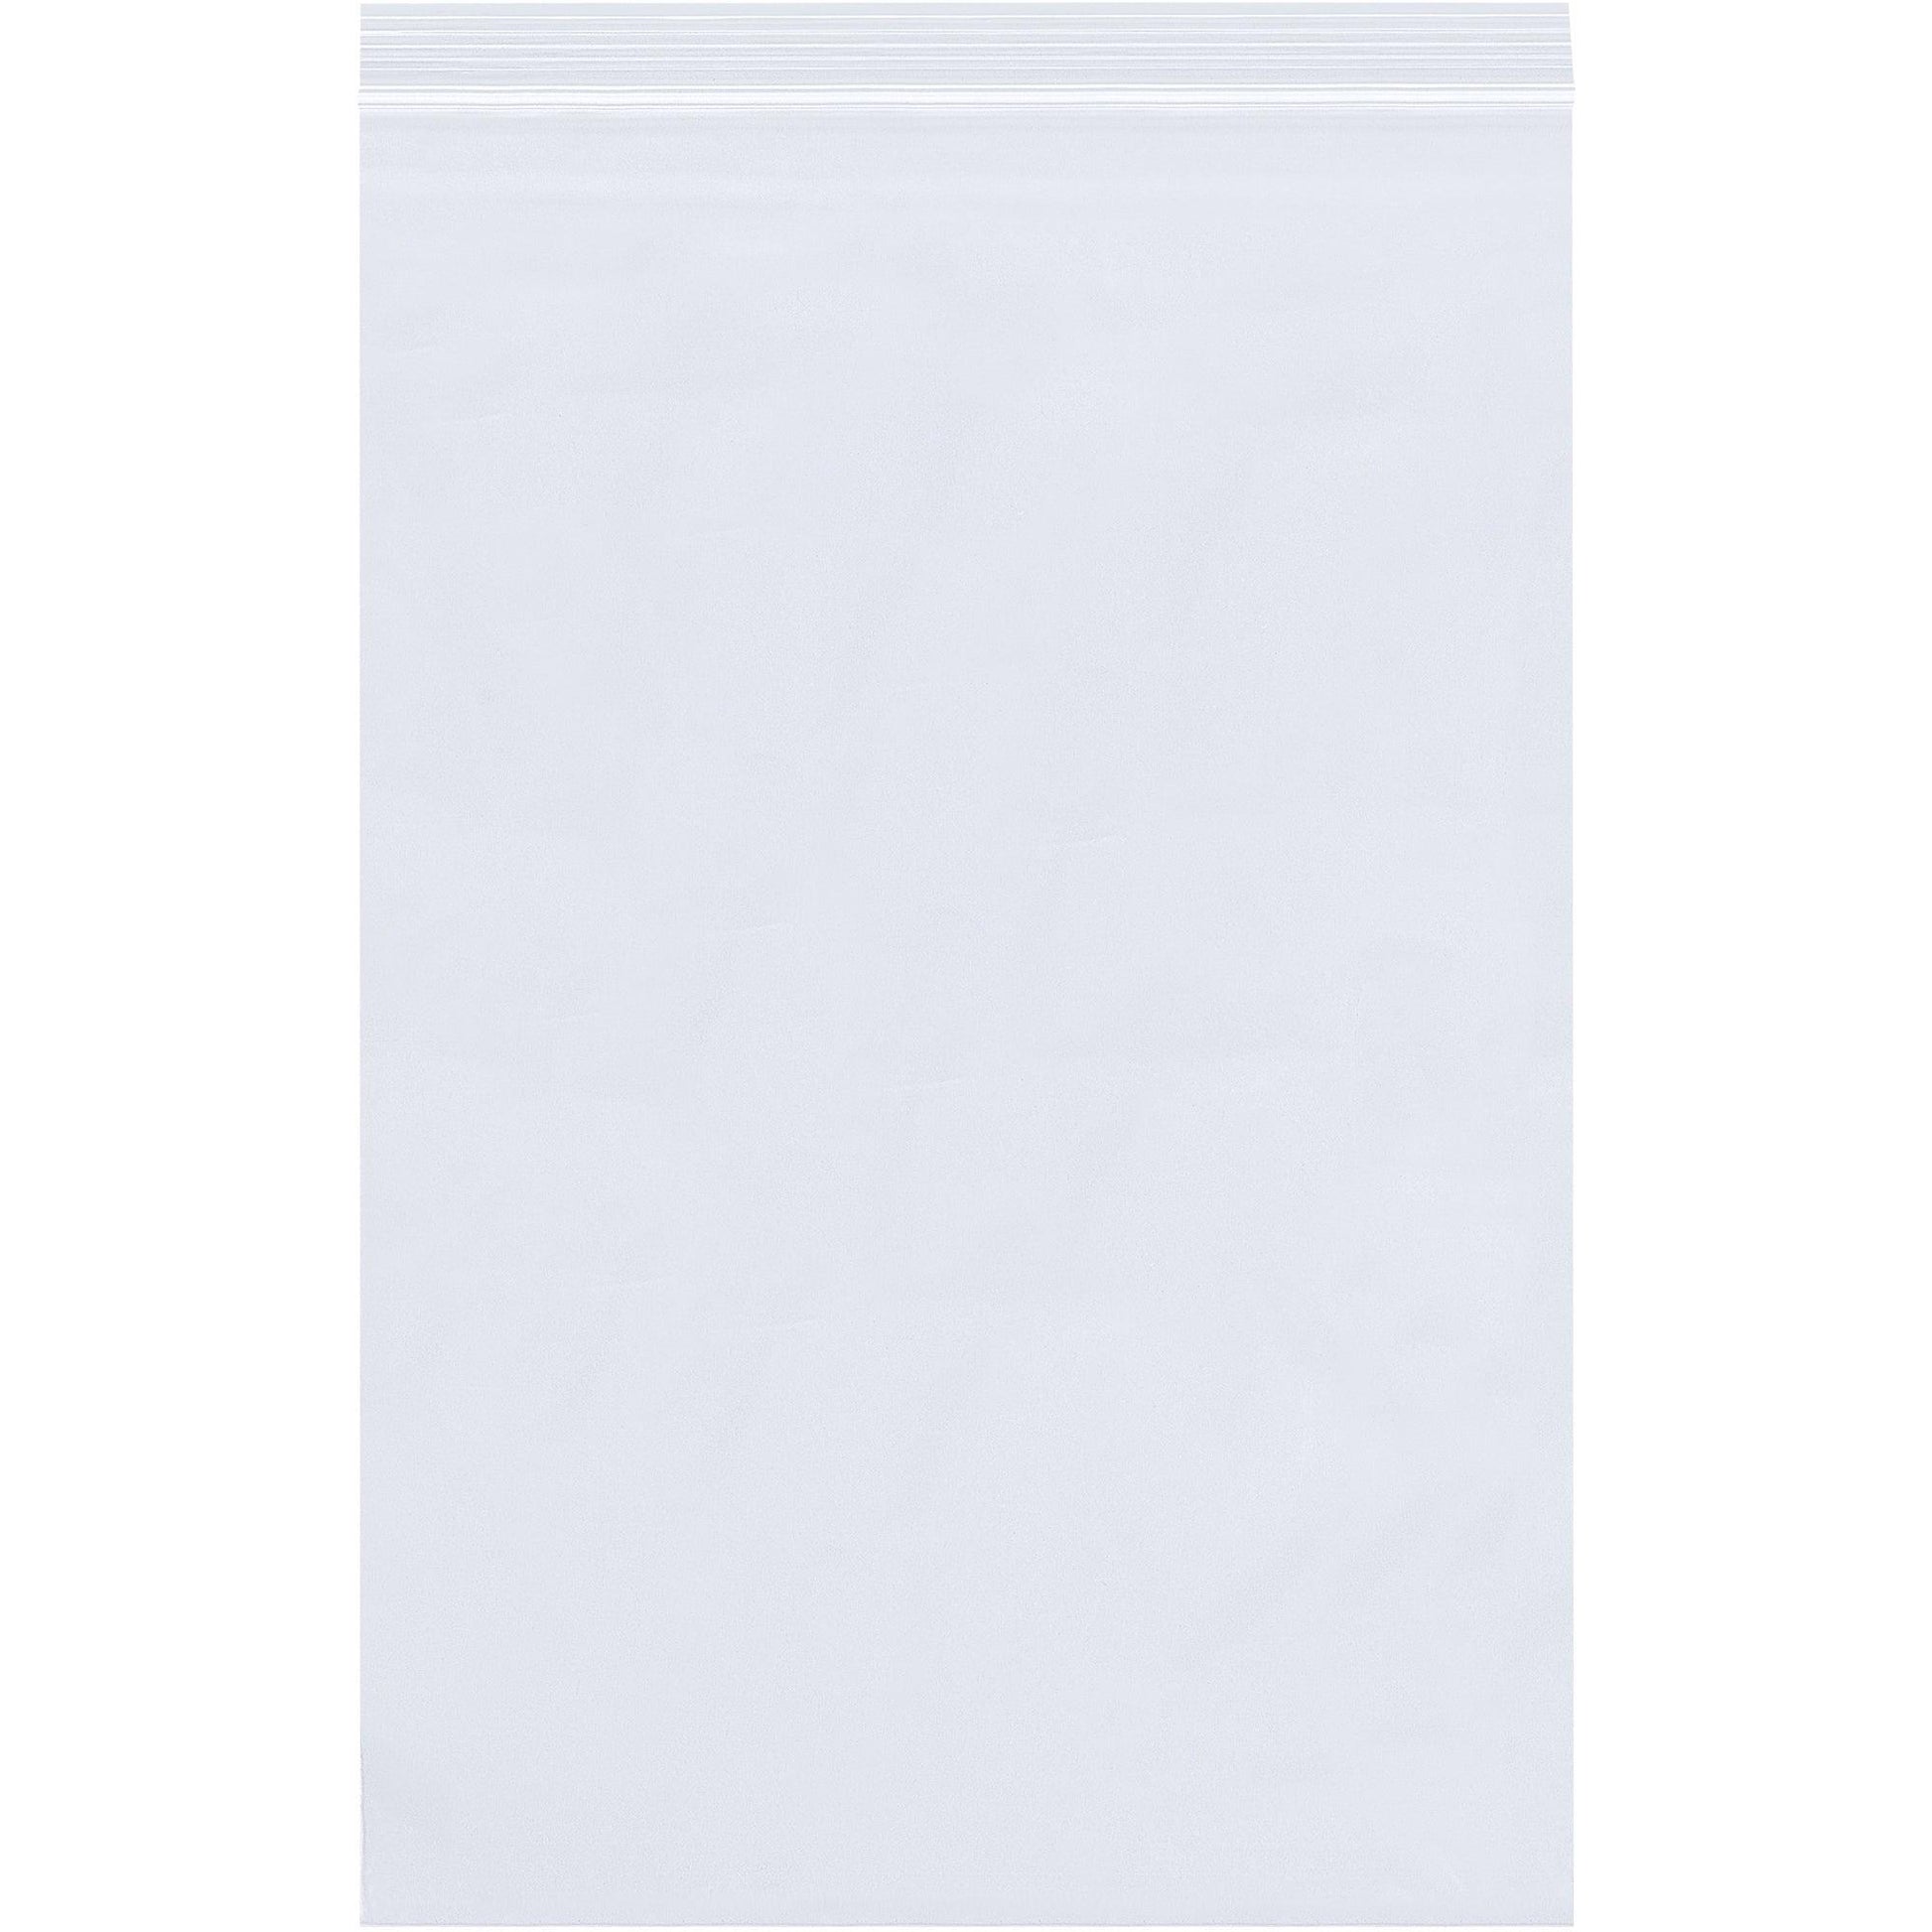 10 x 30" - 4 Mil Reclosable Poly Bags - PB4181